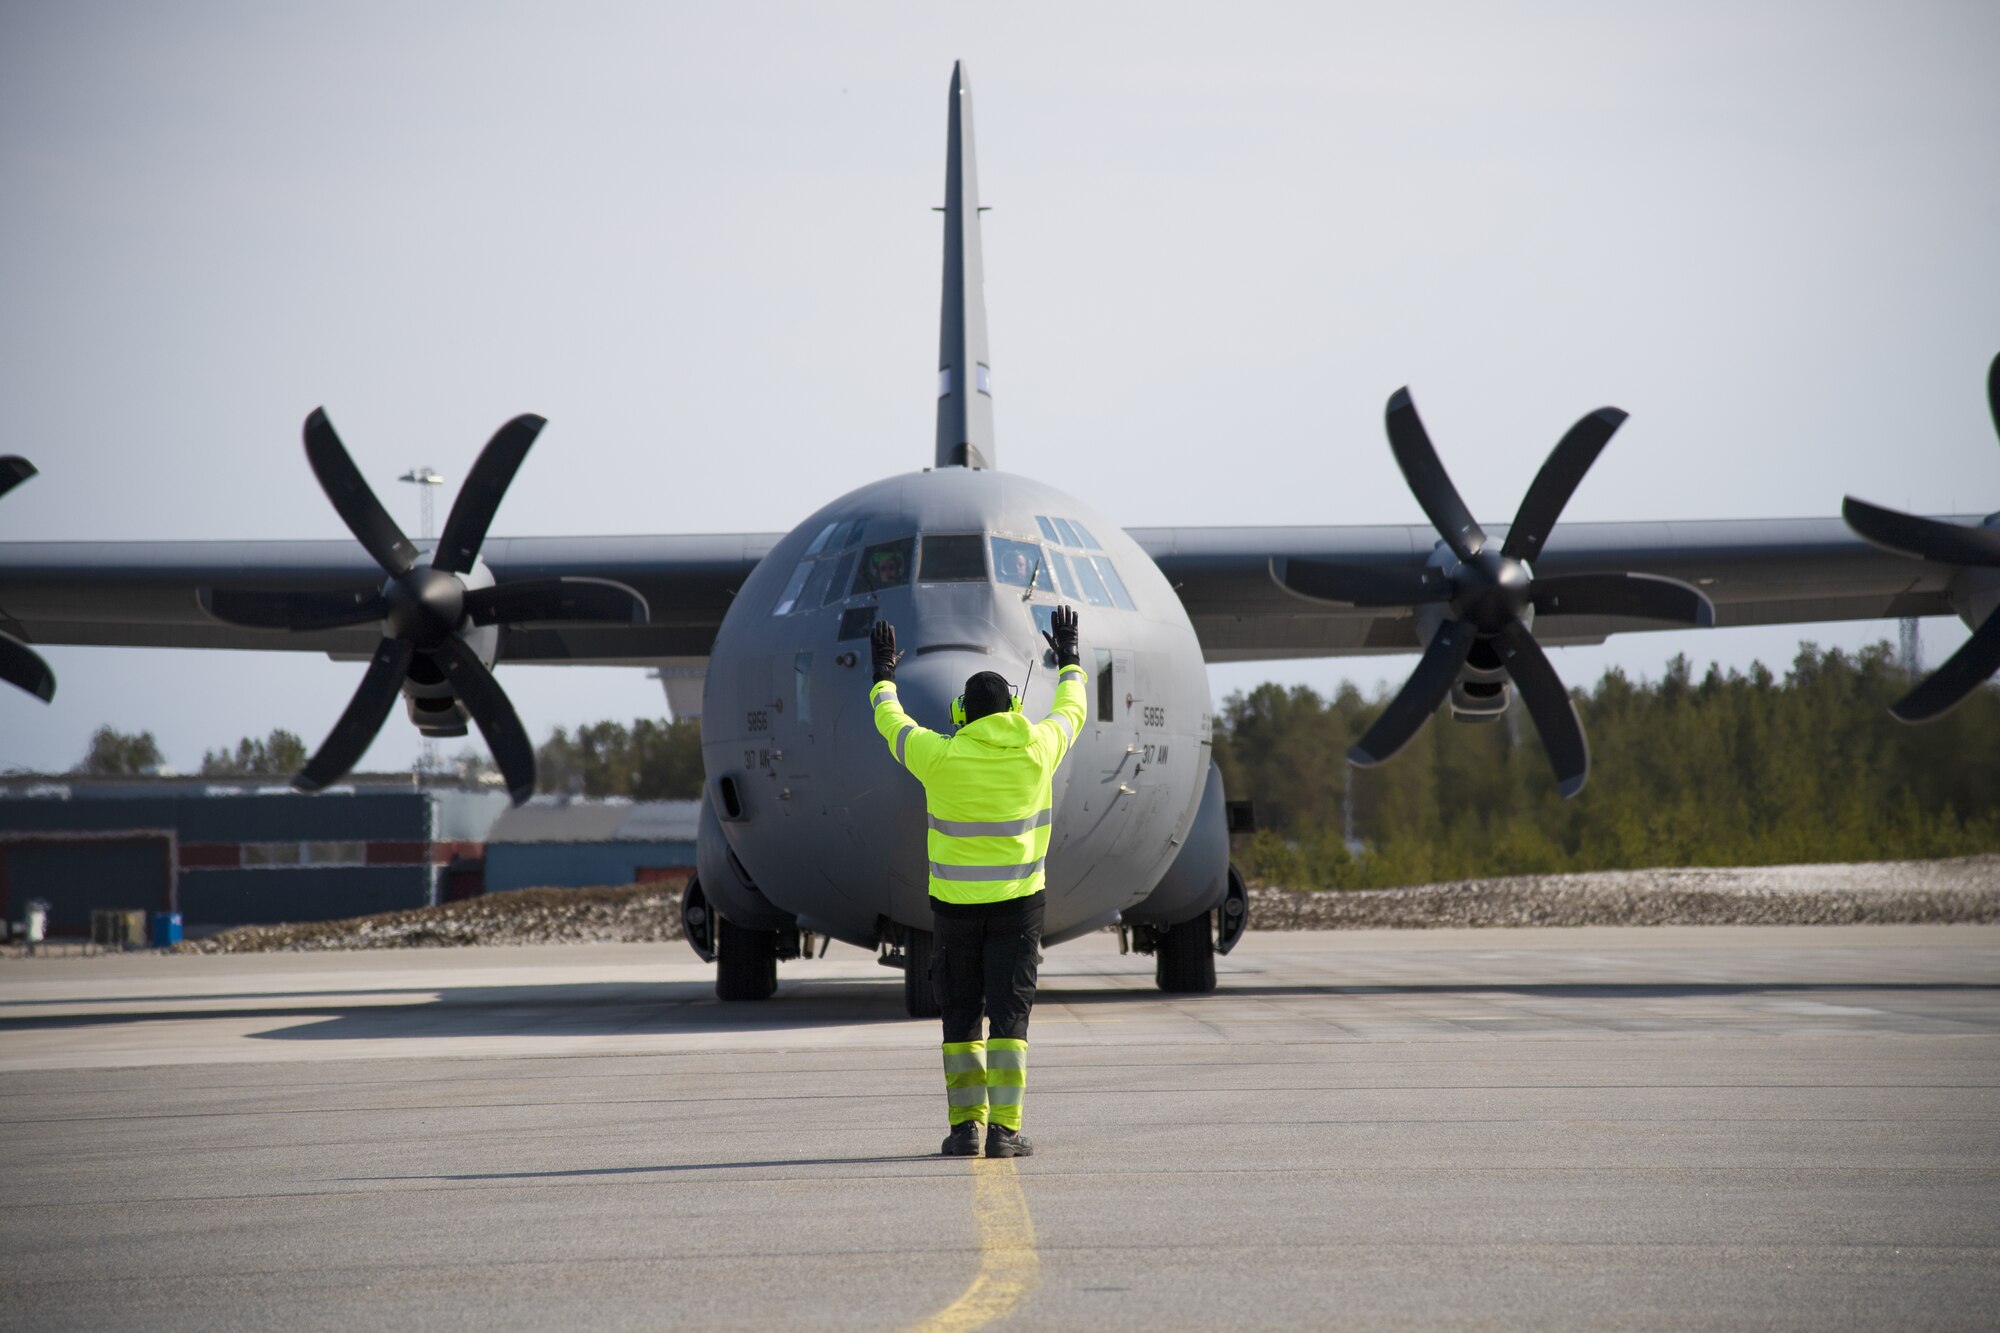 An employee at Kallax Air Base, Sweden, directs a U.S. Air Force C-130 Hercules aircraft on the taxiway at Kallax AB, Sweden, May 14, 2021. The aircraft transported supplies to be used in the Arctic Challenge Exercise 2021, as well as Airmen from the 52nd Fighter Wing at Spangdahlem Air Base, Germany, and the 86th Airlift Wing at Ramstein Air Base, Germany. (U.S. Air Force photo by Senior Airman Ali Stewart)